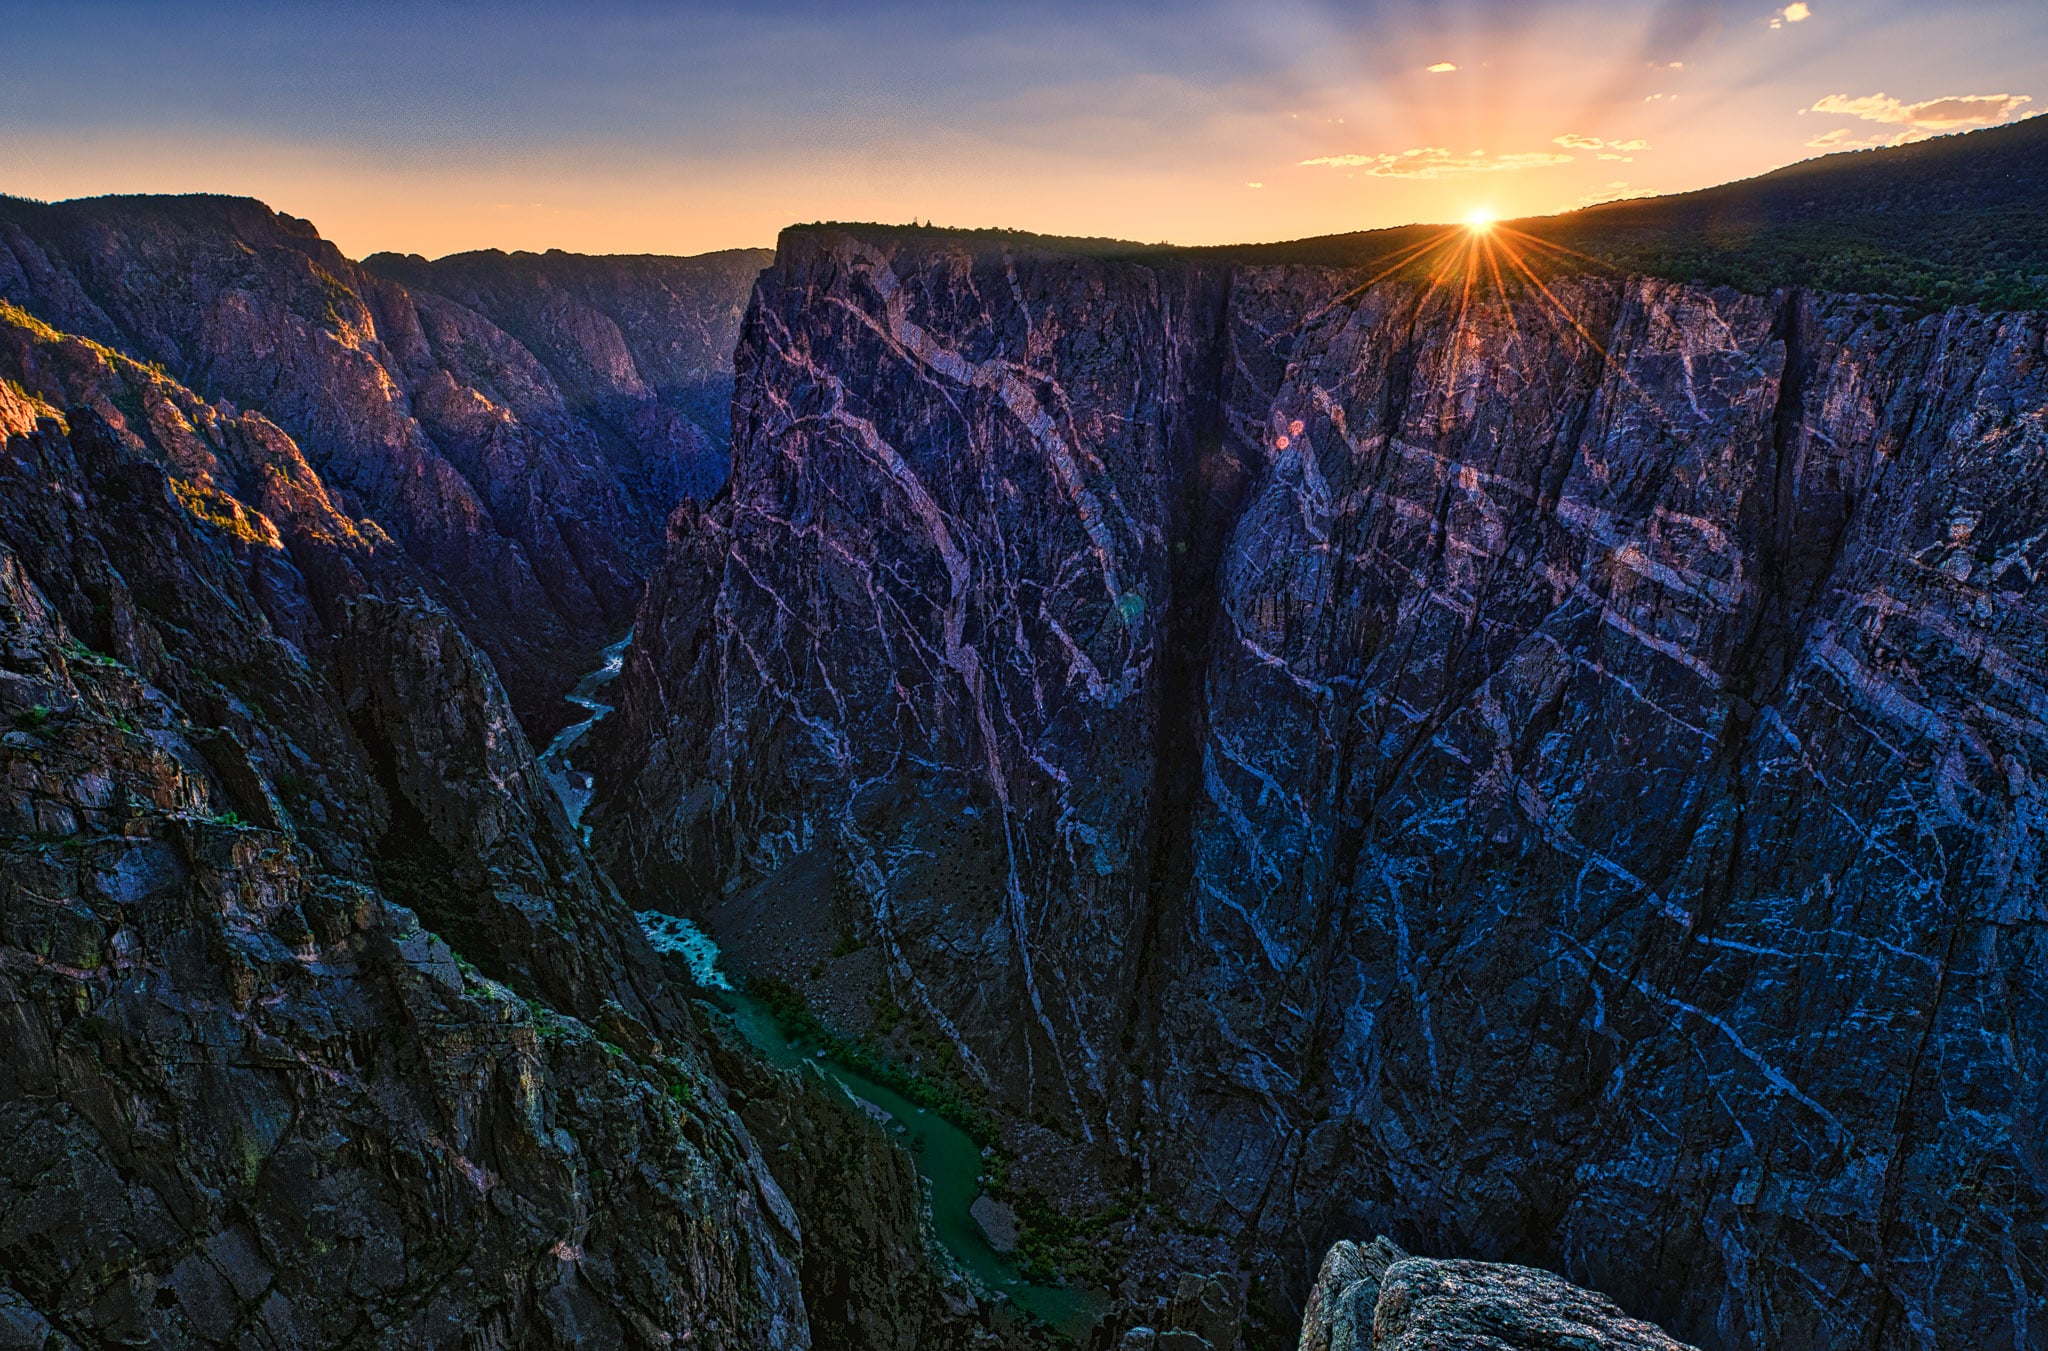 A view of the Painted Wall at sunset in Black Canyon of the Gunnison National Park in Colorado from the Painted Wall View overlook.